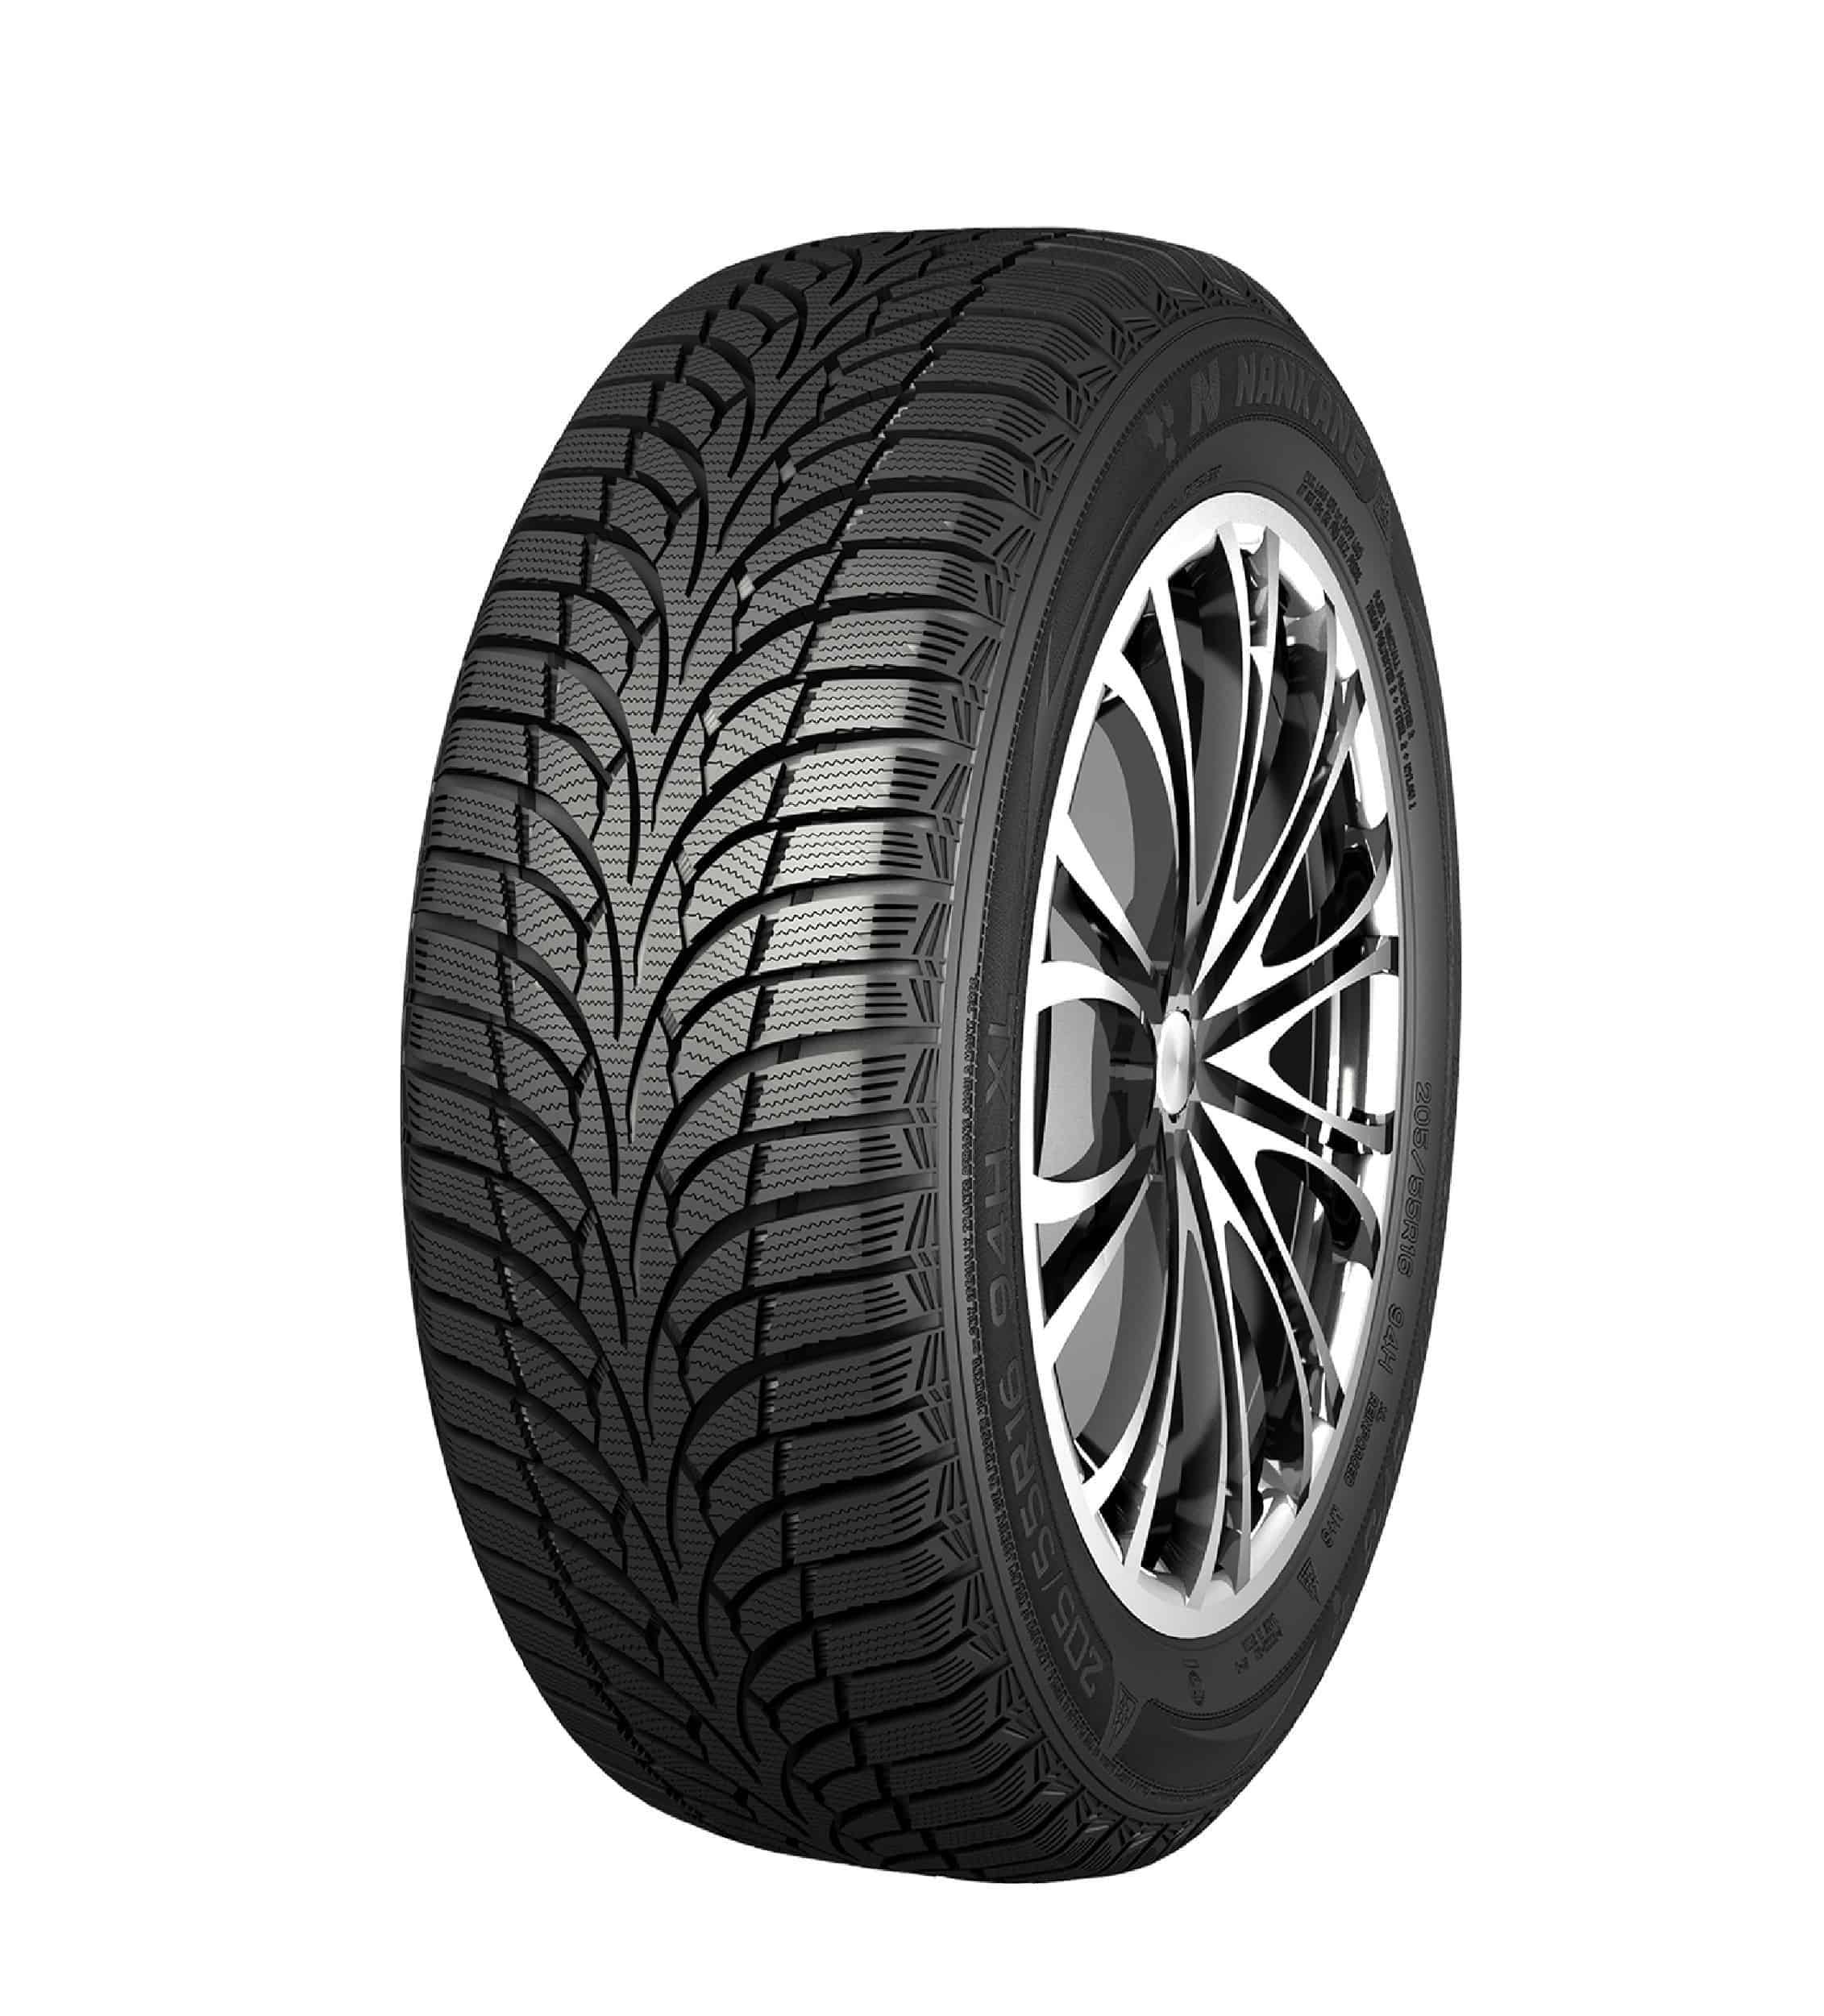 Gomme Nuove Nankang 185/55 R15 86H Winter Activa SV-3 XL M+S pneumatici nuovi Invernale